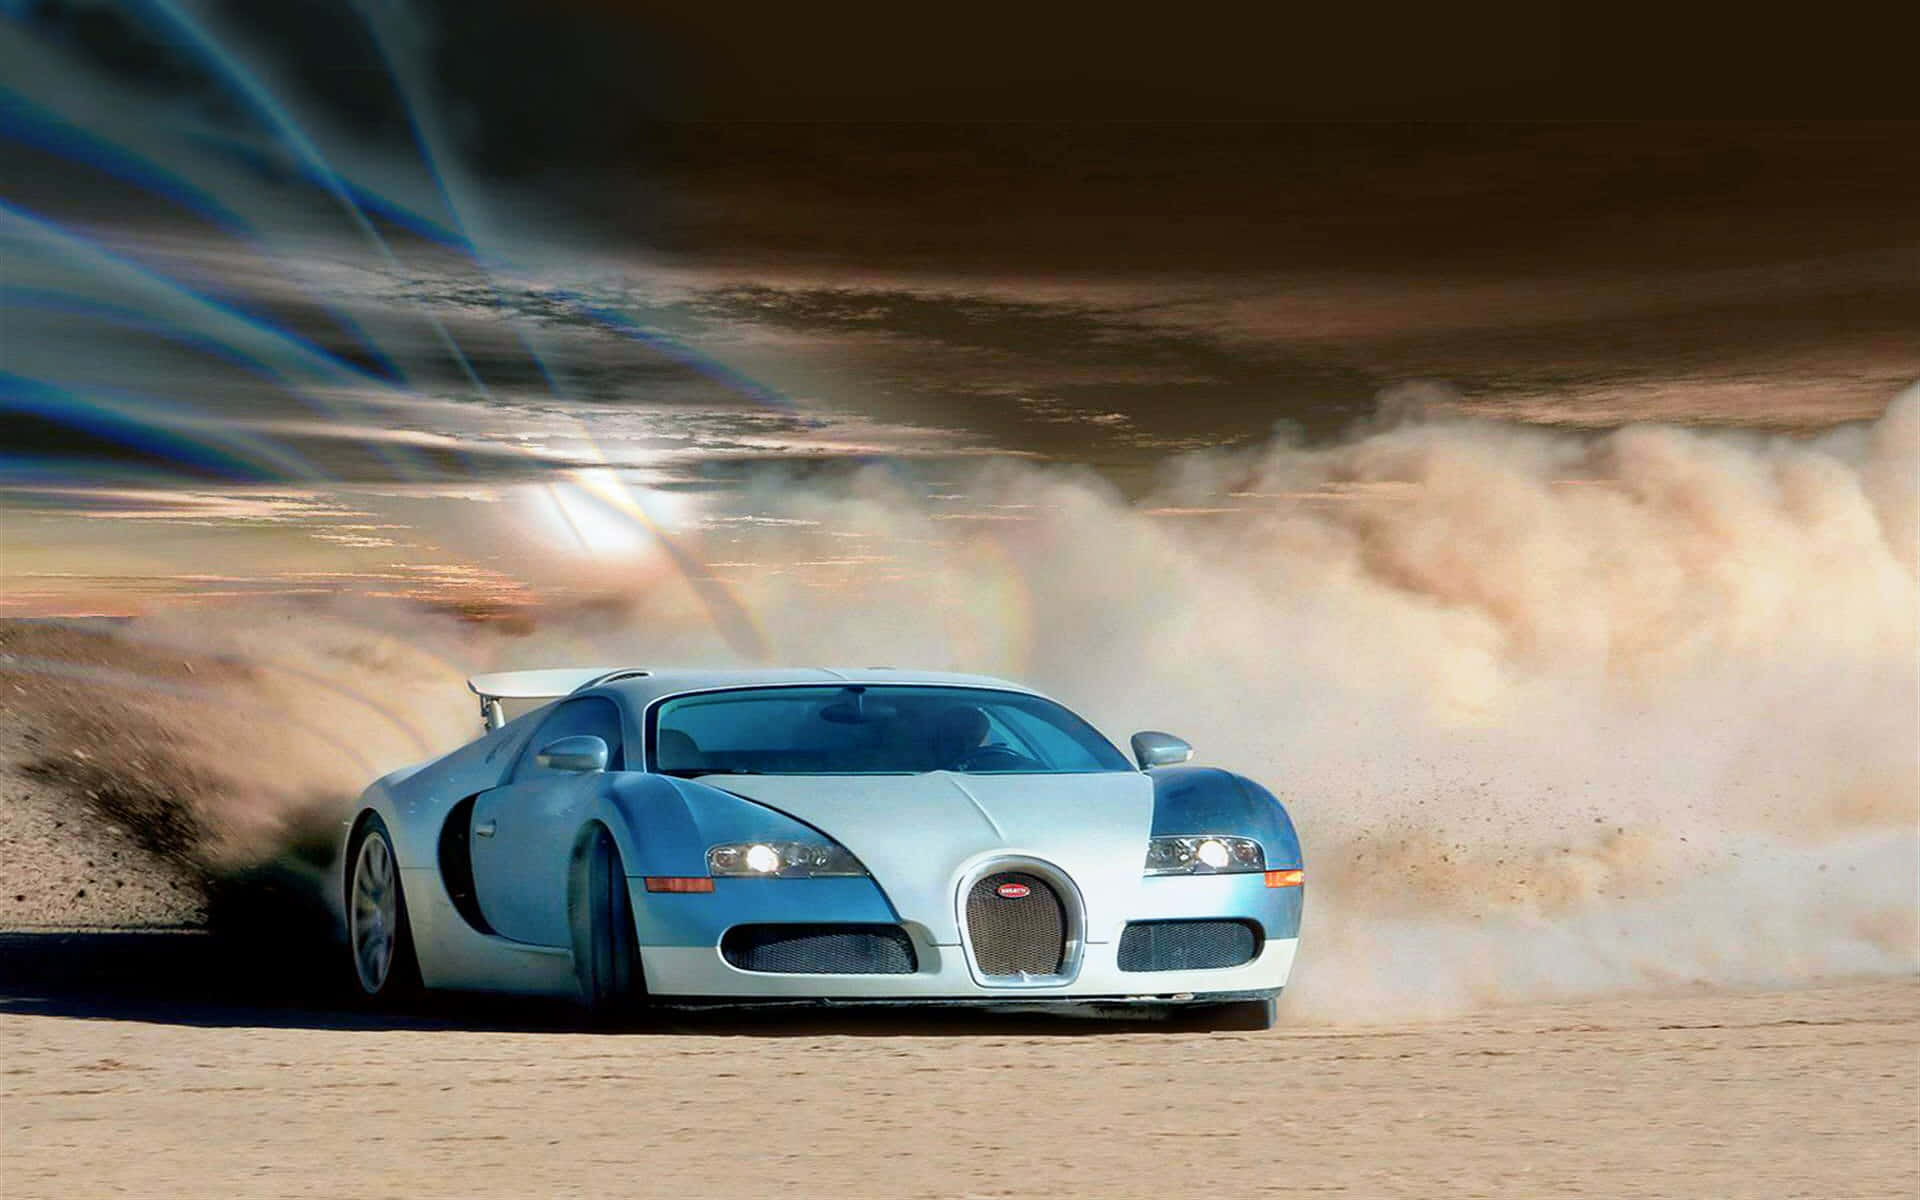 An Intimidating Overview of the Iconic Bugatti Car Wallpaper